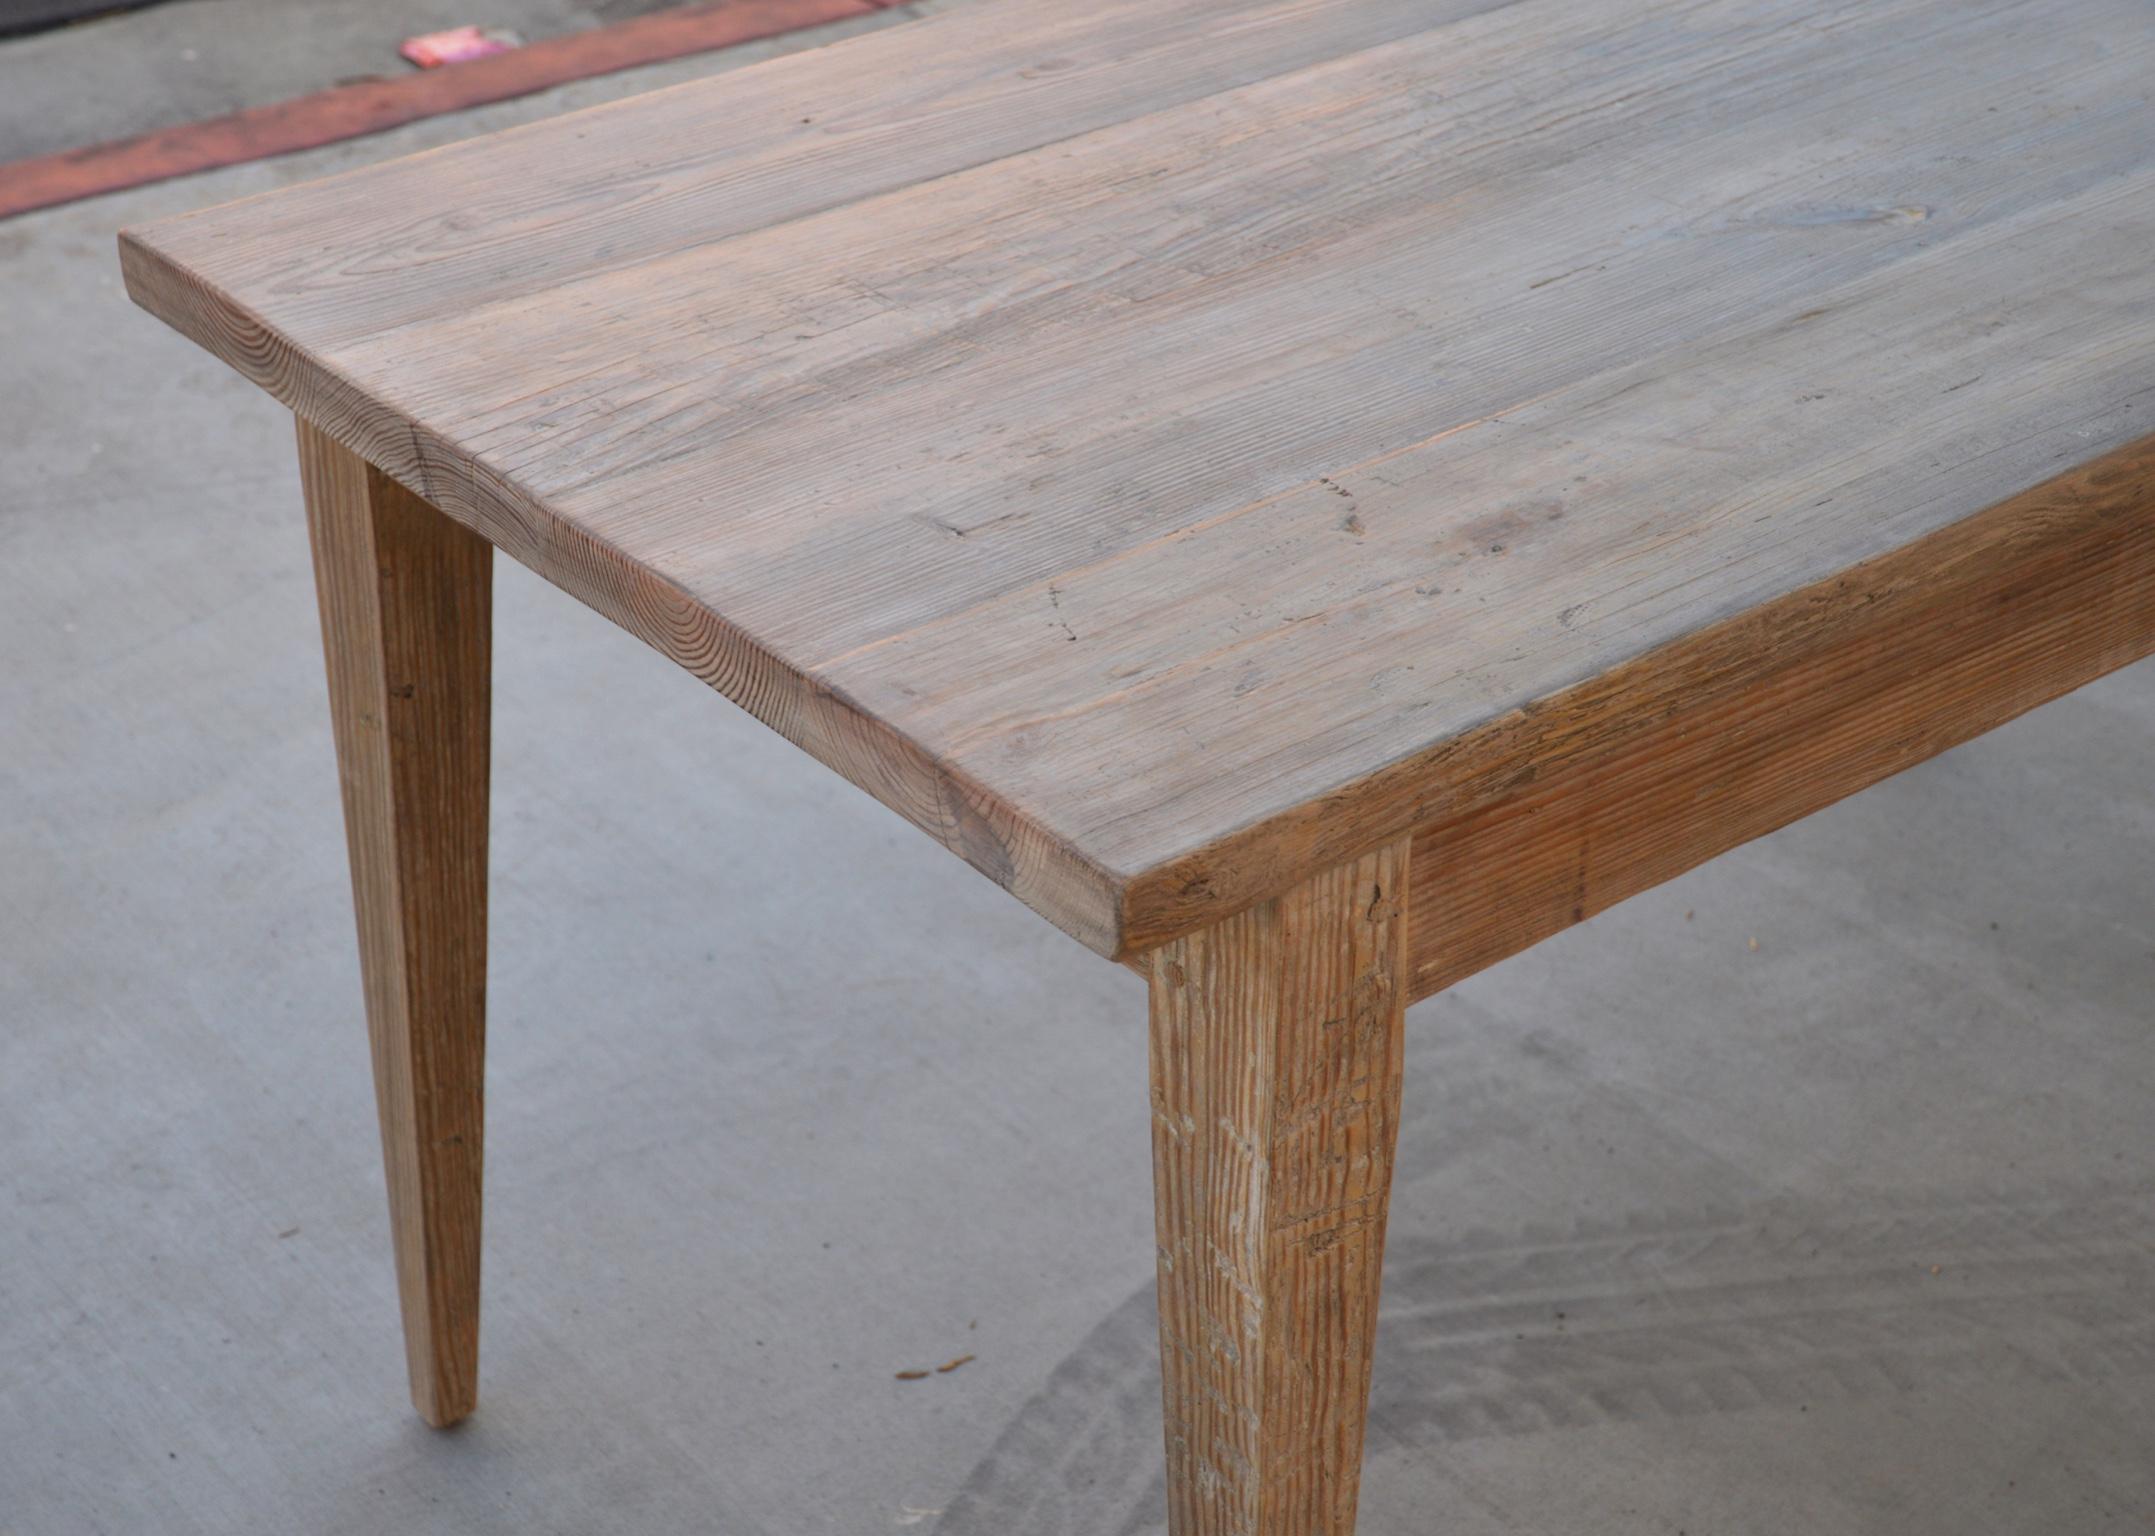 Hand-Crafted Harvest Table Made from Reclaimed Pine